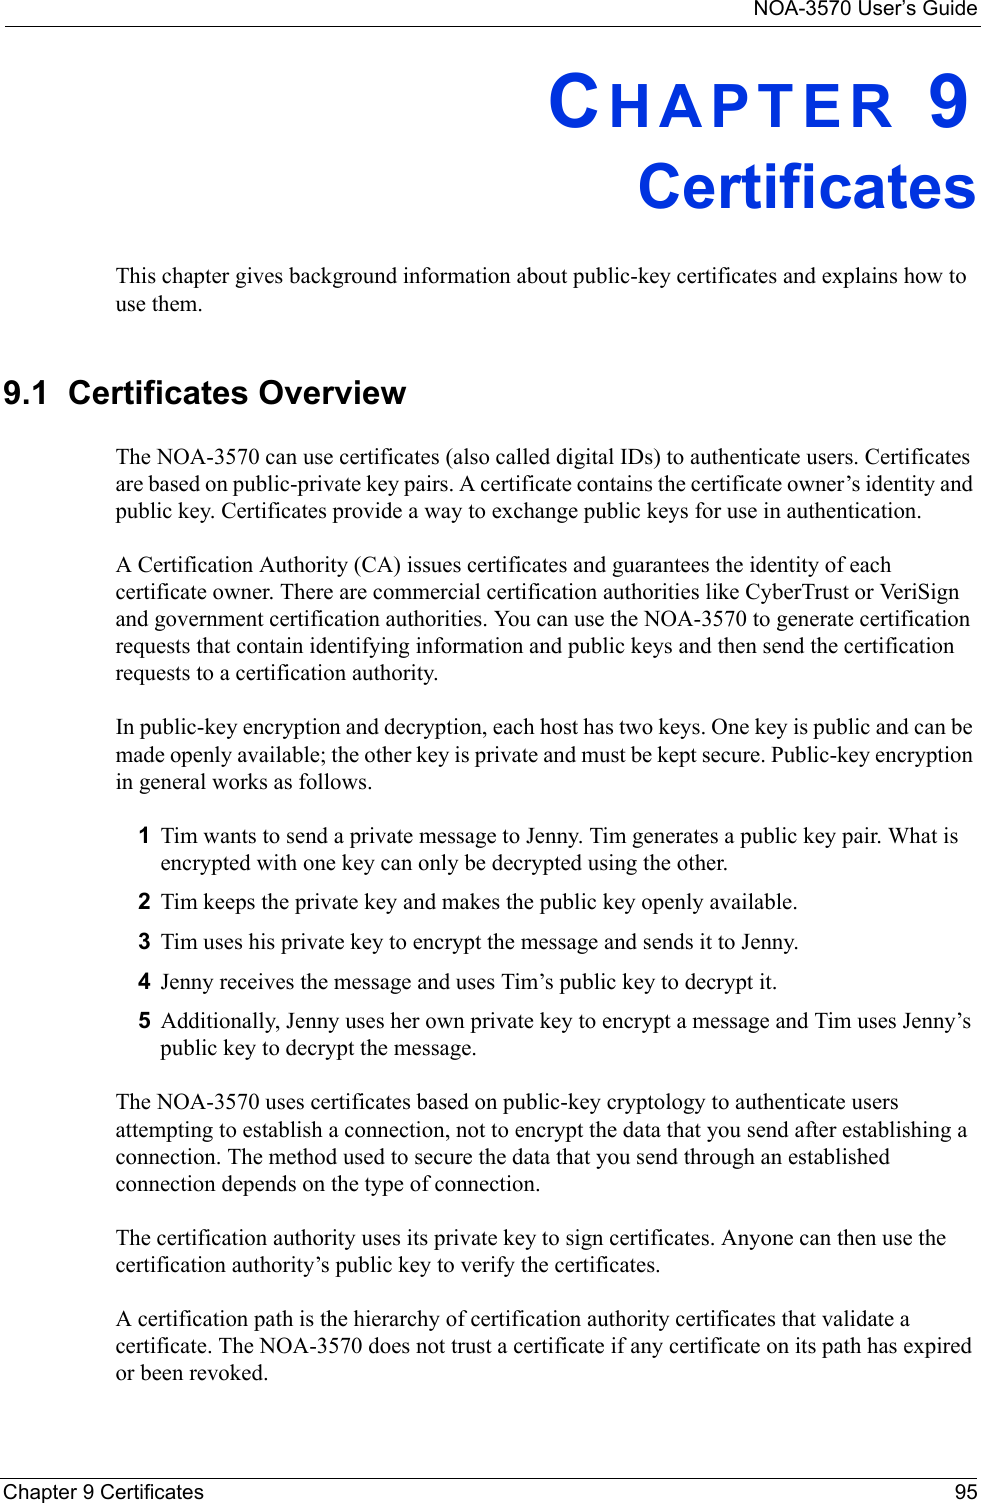 NOA-3570 User’s GuideChapter 9 Certificates 95CHAPTER 9CertificatesThis chapter gives background information about public-key certificates and explains how to use them.9.1  Certificates OverviewThe NOA-3570 can use certificates (also called digital IDs) to authenticate users. Certificates are based on public-private key pairs. A certificate contains the certificate owner’s identity and public key. Certificates provide a way to exchange public keys for use in authentication. A Certification Authority (CA) issues certificates and guarantees the identity of each certificate owner. There are commercial certification authorities like CyberTrust or VeriSign and government certification authorities. You can use the NOA-3570 to generate certification requests that contain identifying information and public keys and then send the certification requests to a certification authority. In public-key encryption and decryption, each host has two keys. One key is public and can be made openly available; the other key is private and must be kept secure. Public-key encryption in general works as follows. 1Tim wants to send a private message to Jenny. Tim generates a public key pair. What is encrypted with one key can only be decrypted using the other.2Tim keeps the private key and makes the public key openly available.3Tim uses his private key to encrypt the message and sends it to Jenny.4Jenny receives the message and uses Tim’s public key to decrypt it.5Additionally, Jenny uses her own private key to encrypt a message and Tim uses Jenny’s public key to decrypt the message.The NOA-3570 uses certificates based on public-key cryptology to authenticate users attempting to establish a connection, not to encrypt the data that you send after establishing a connection. The method used to secure the data that you send through an established connection depends on the type of connection.The certification authority uses its private key to sign certificates. Anyone can then use the certification authority’s public key to verify the certificates.A certification path is the hierarchy of certification authority certificates that validate a certificate. The NOA-3570 does not trust a certificate if any certificate on its path has expired or been revoked. 